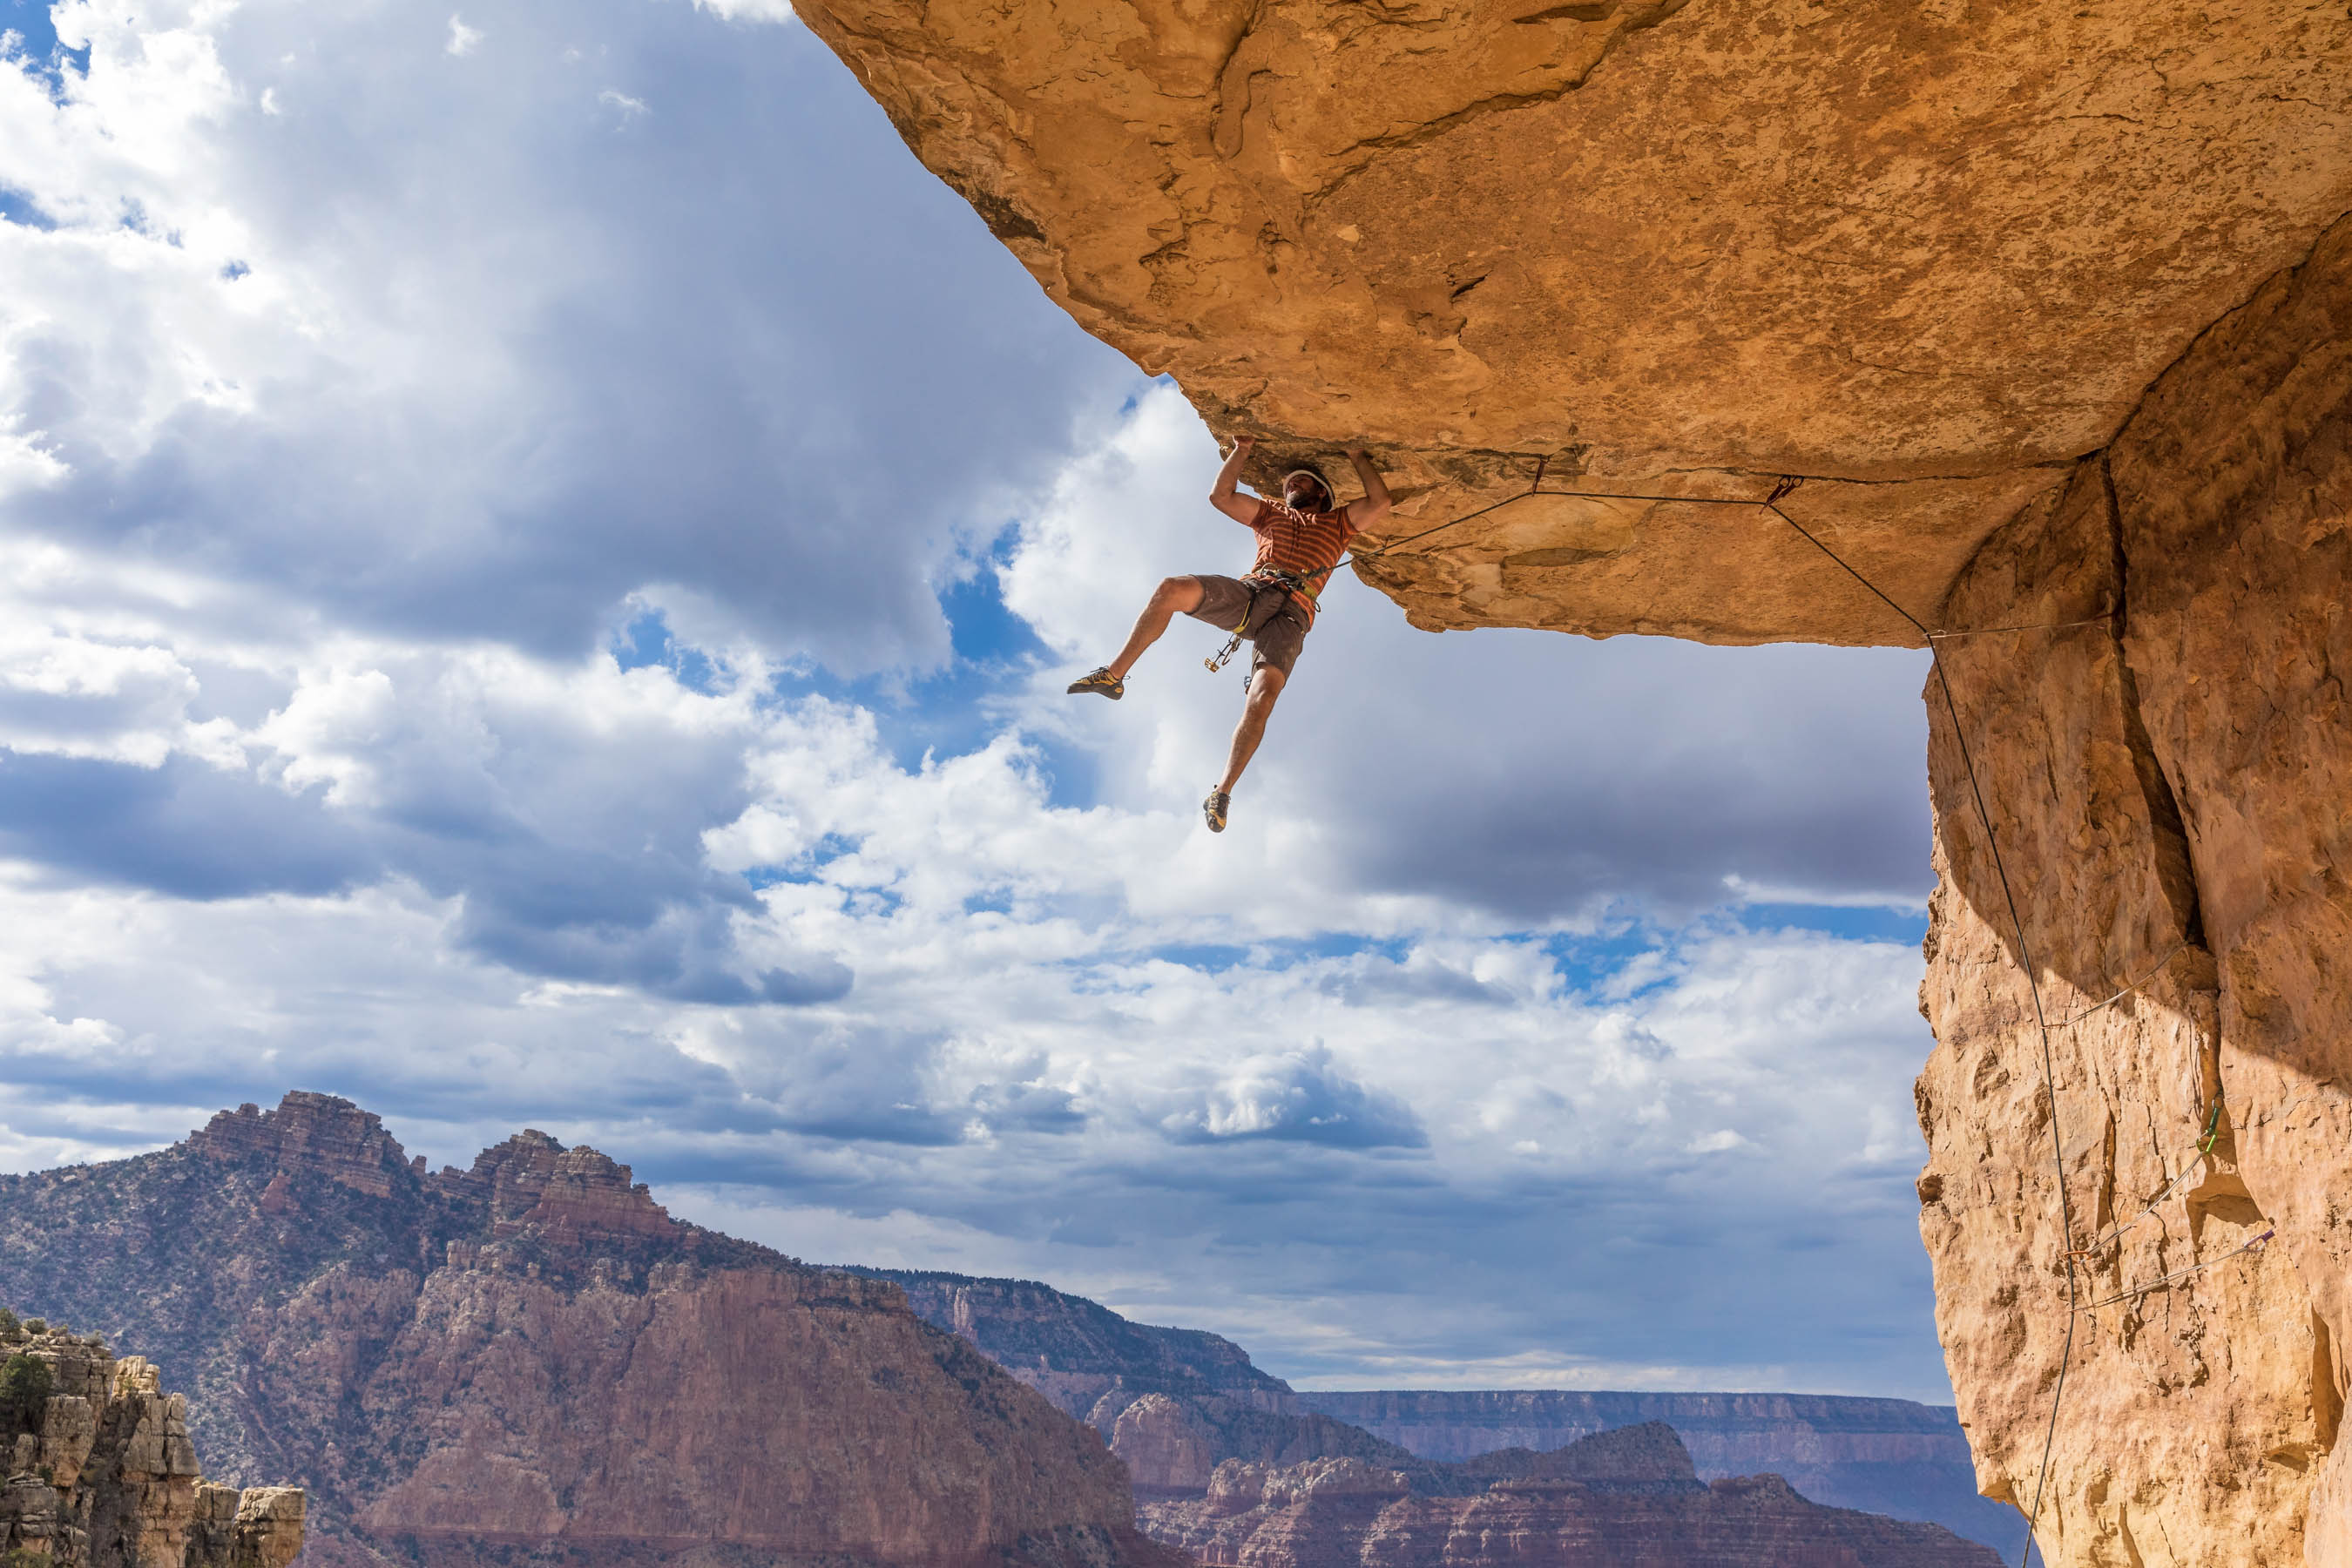 A rock climber in the Grand Canyon